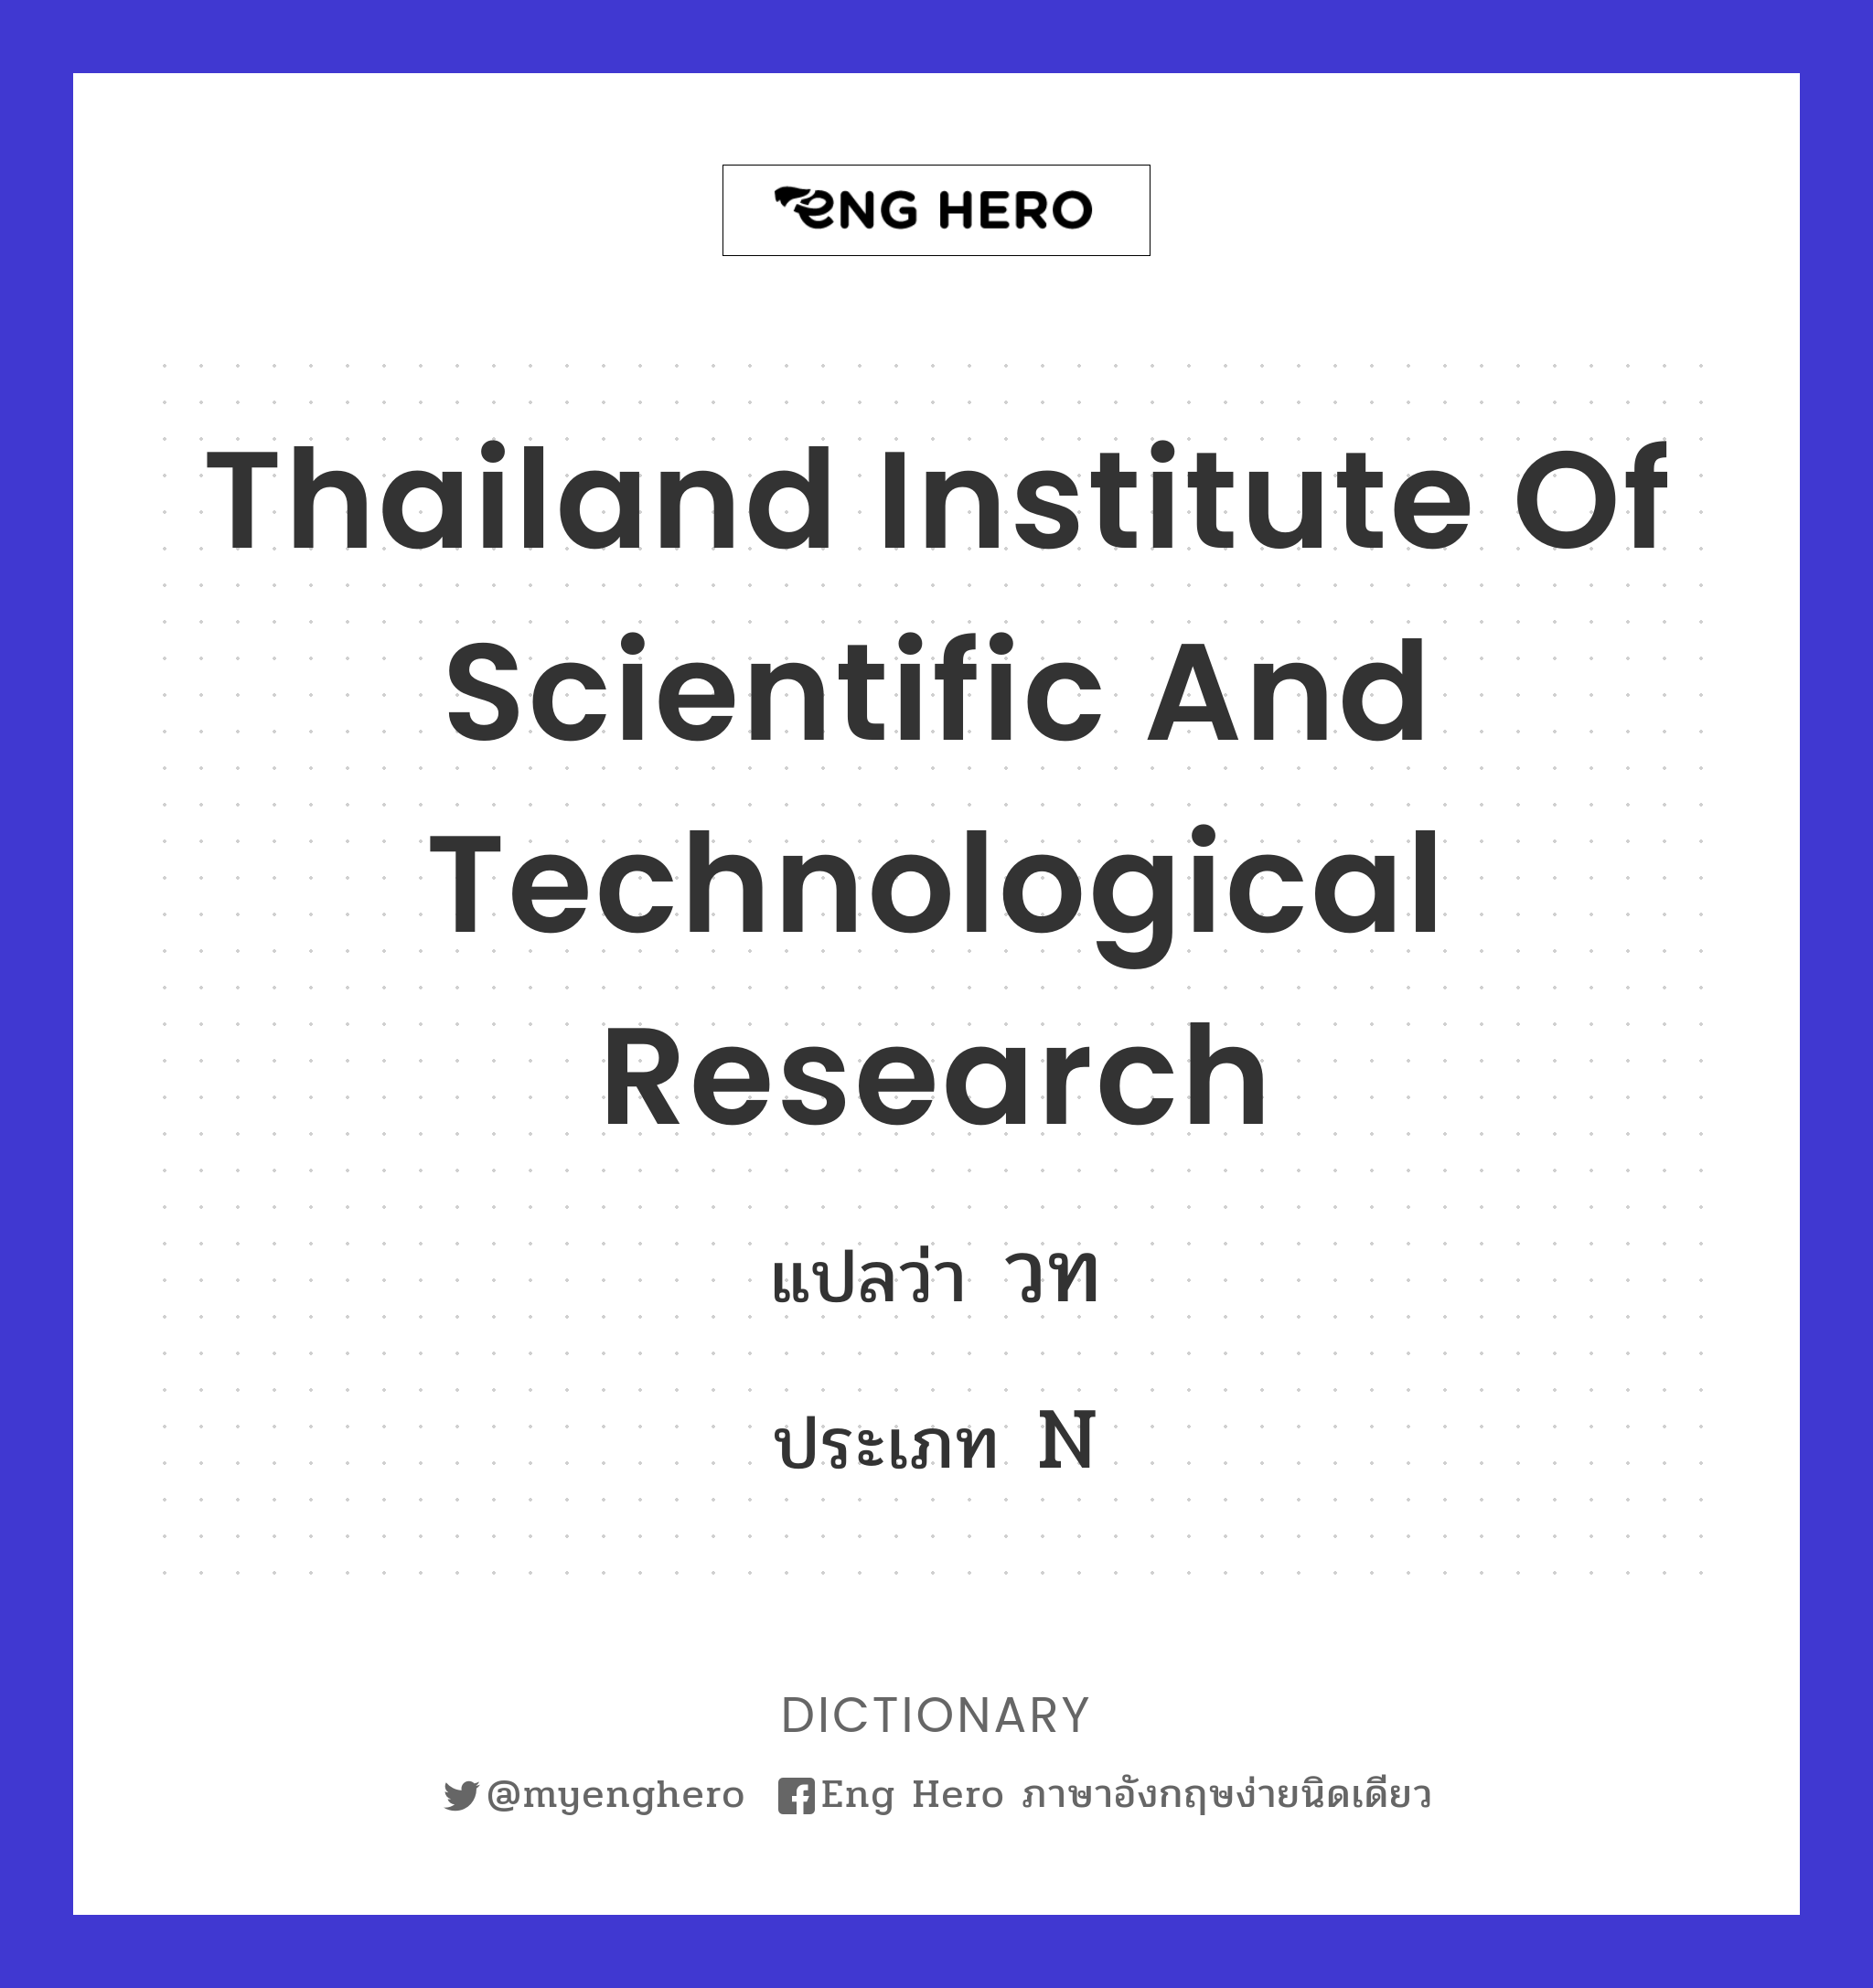 Thailand Institute of Scientific and Technological Research